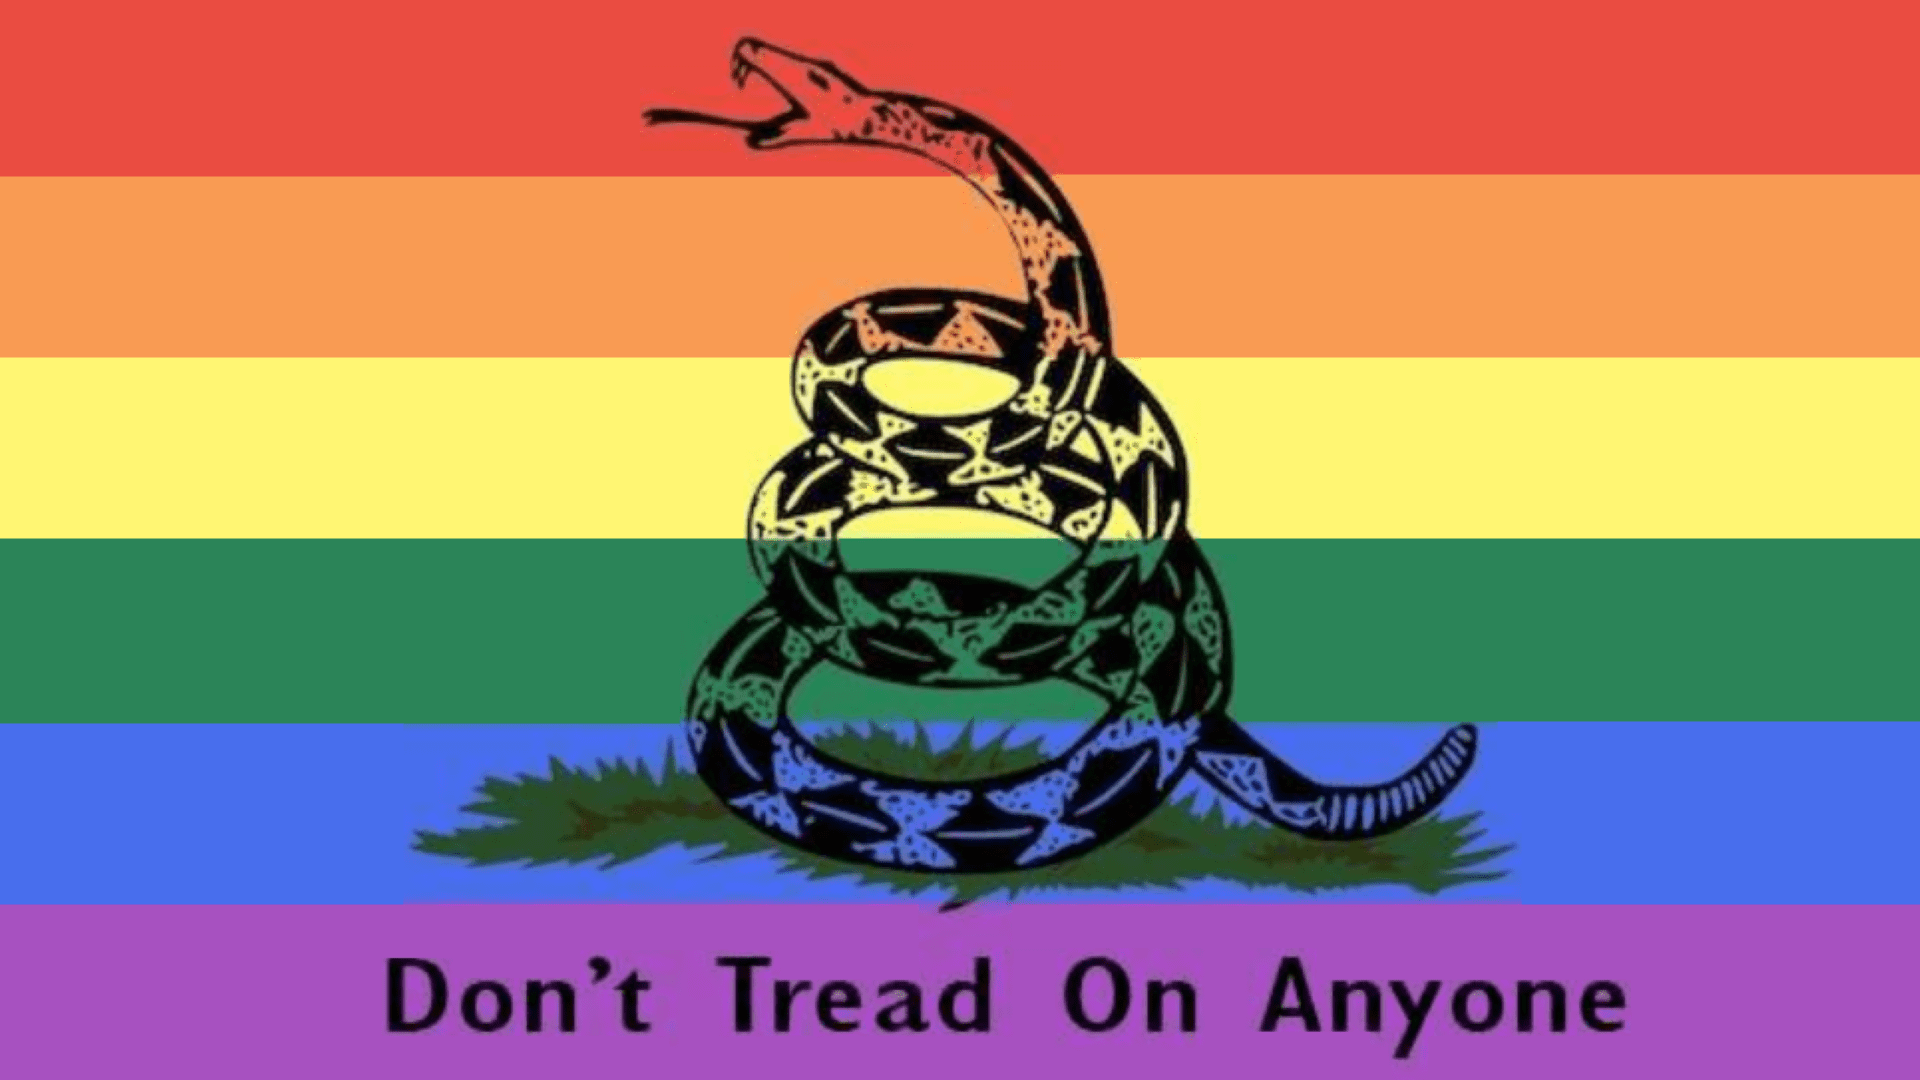 LGBT libertarianism holds up the rights of all people. A libertarian society is one where everyone is treated the same under the law.